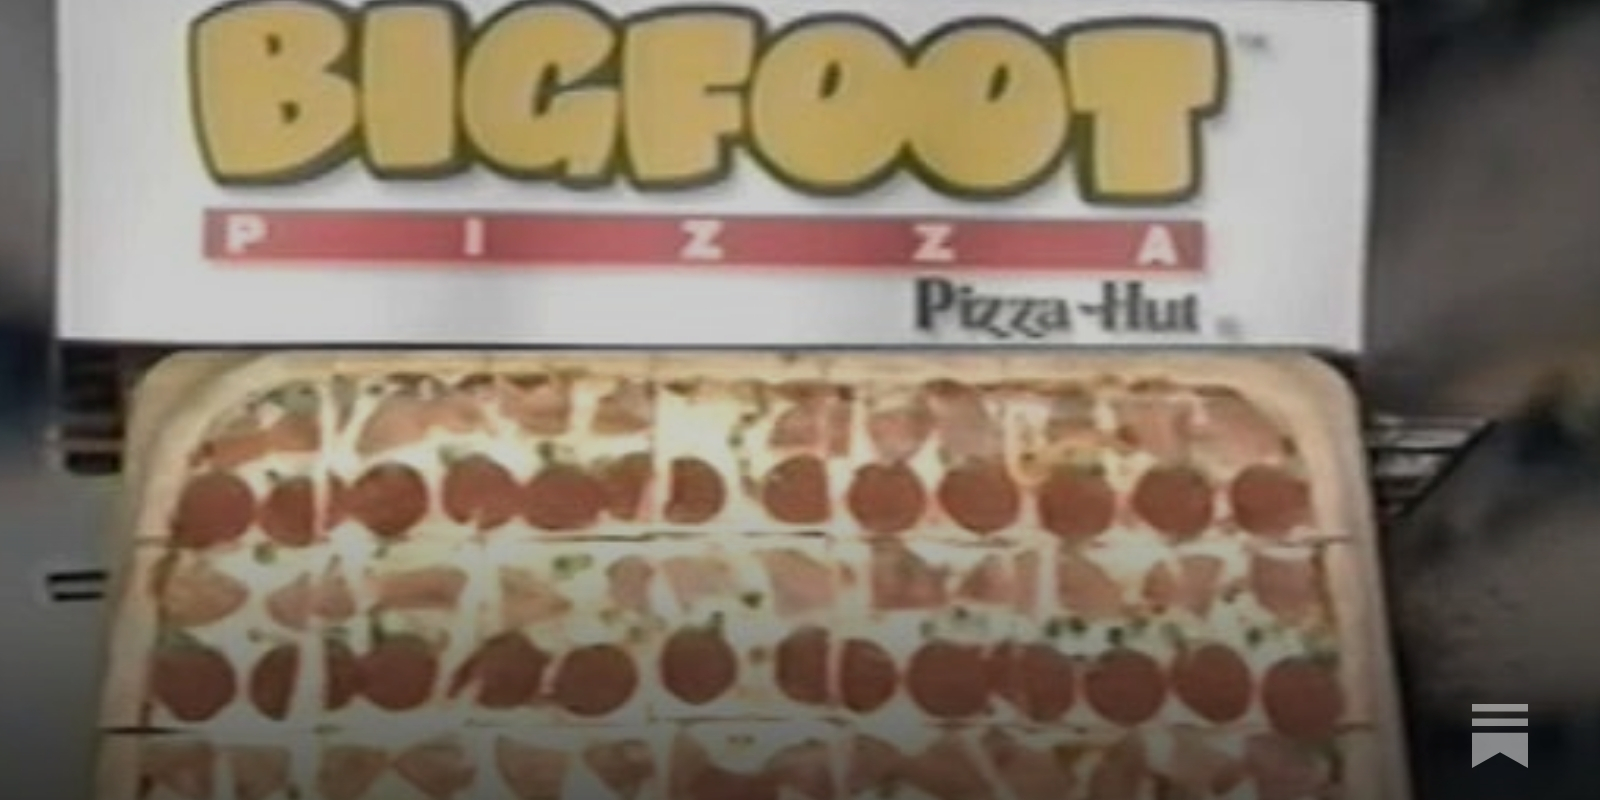 Pizza Hut Brings the Big ItalyBut What Ever Became of BIGFOOT